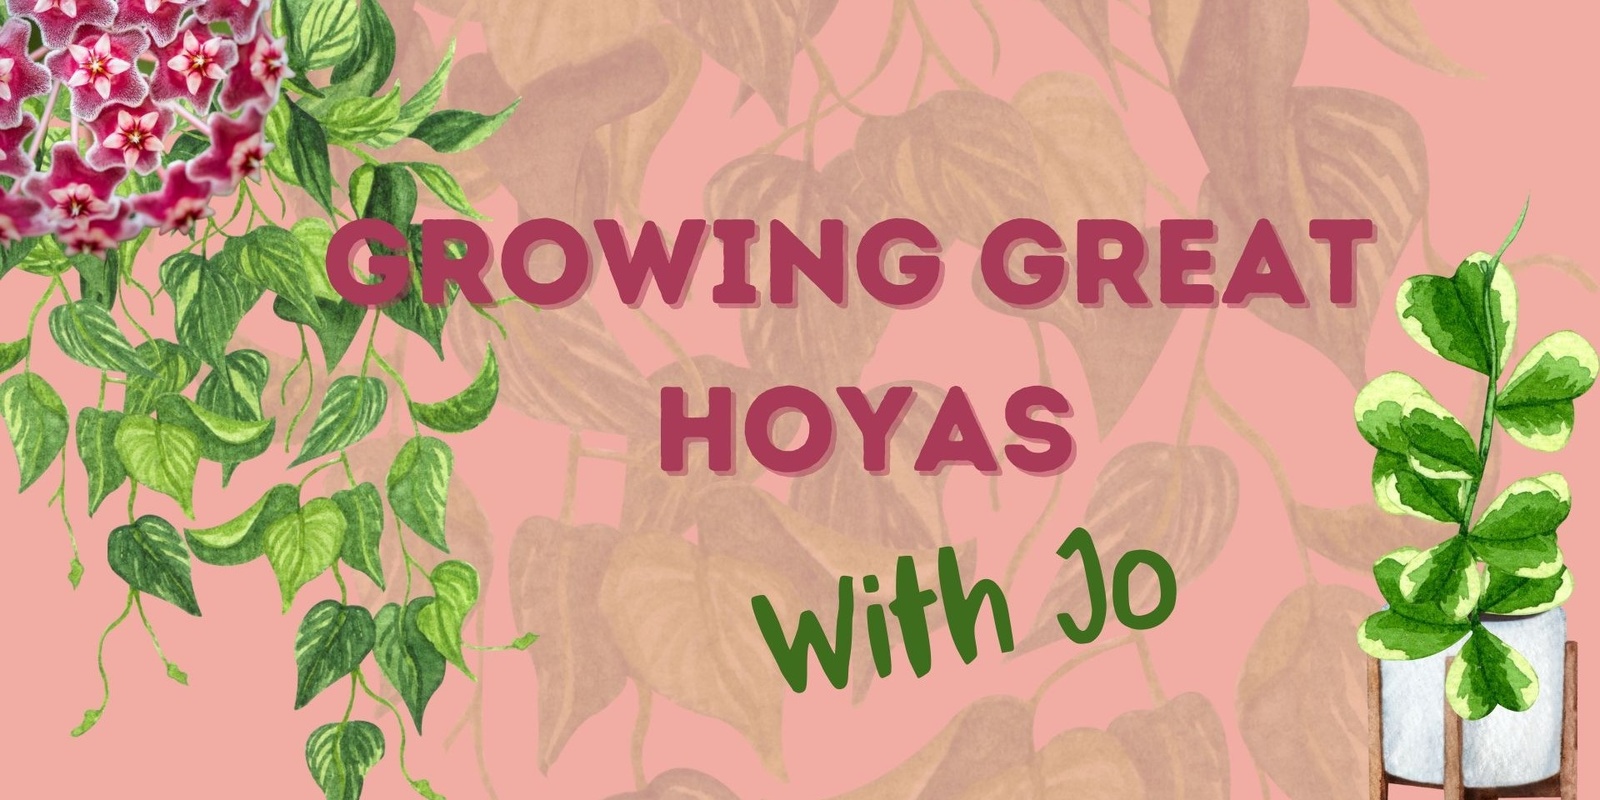 Banner image for Growing Great Hoyas with Jo